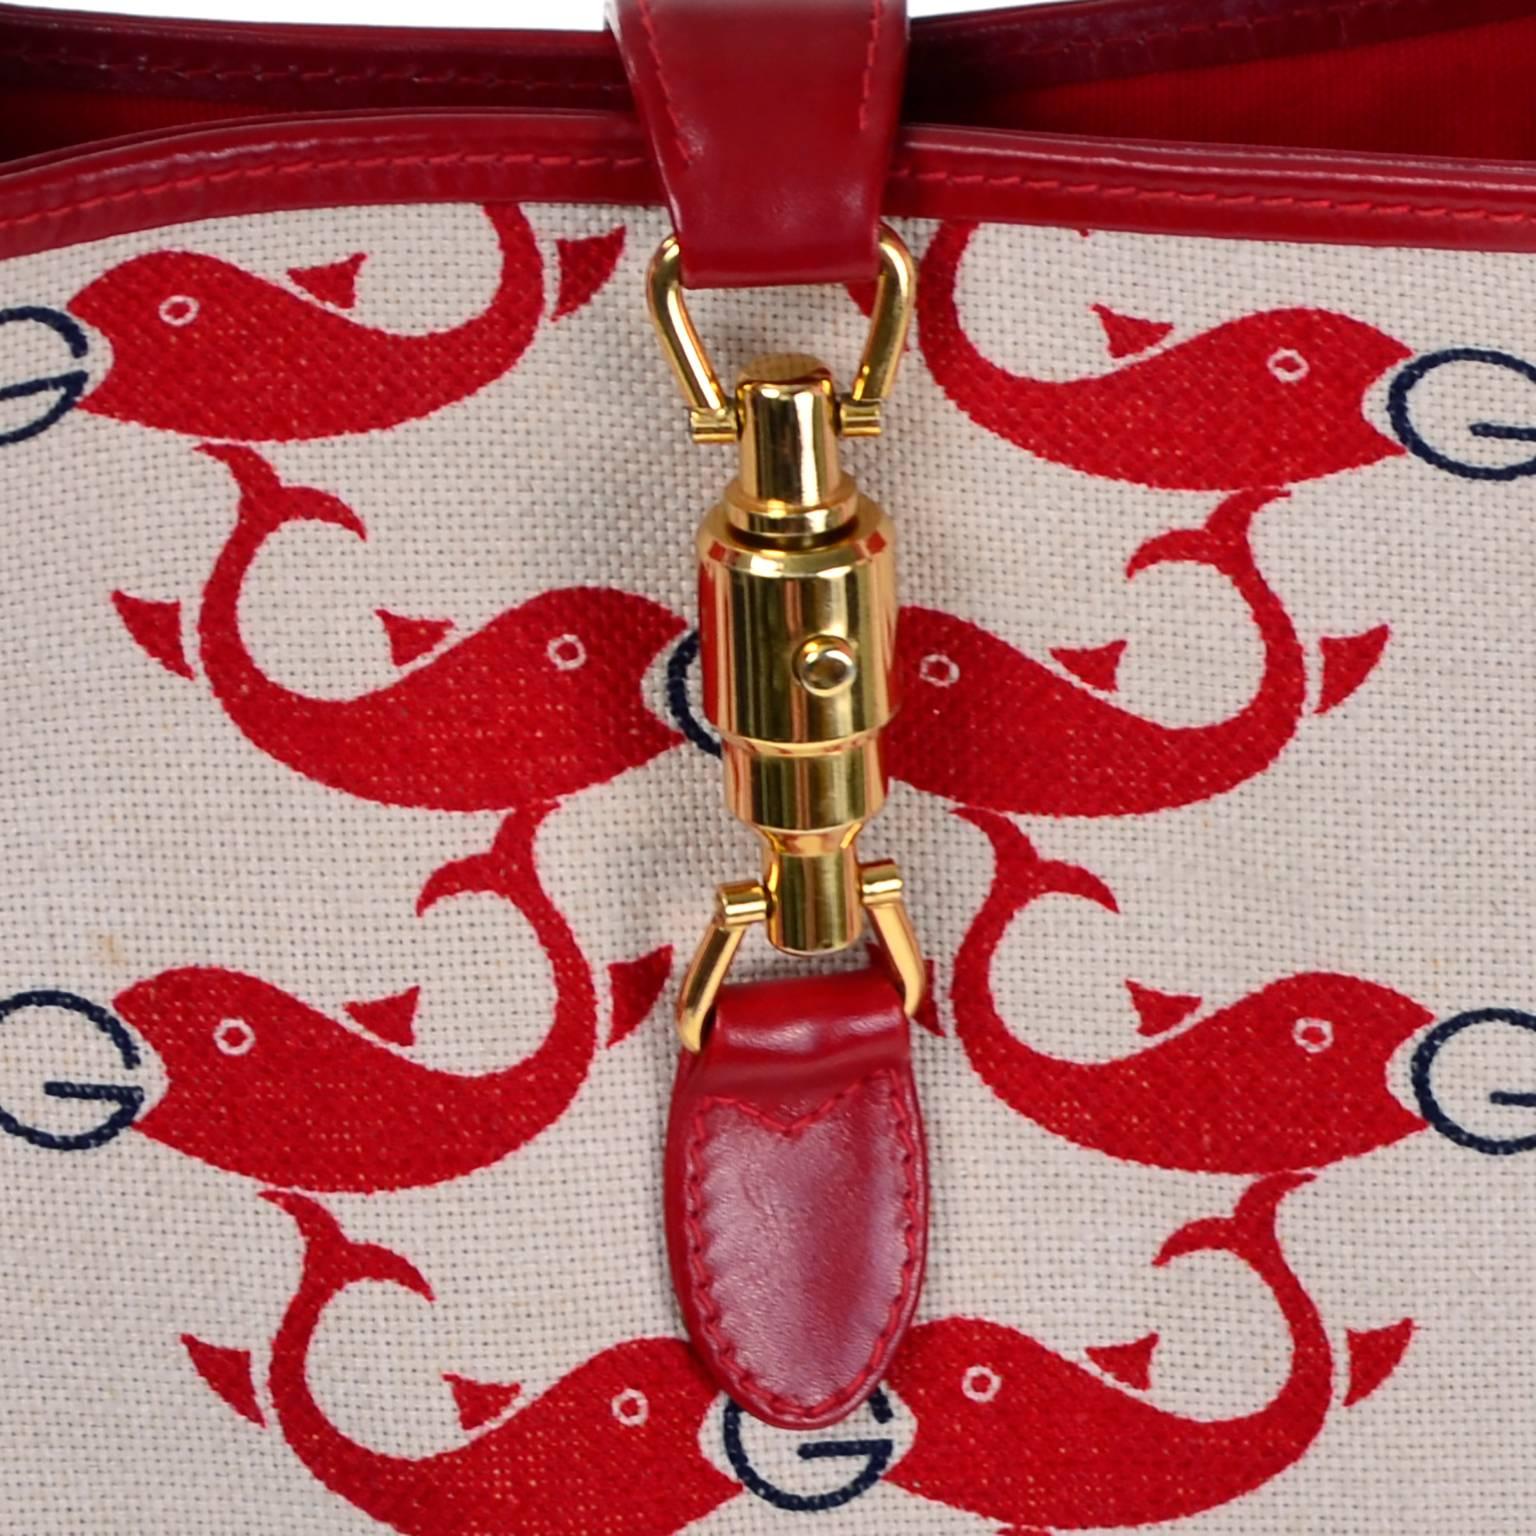 This is a wonderful vintage handbag from Gucci in an off white, (almost sand) and red whale or dolphin print canvas with red leather trim. This handbag measures 7x10.5